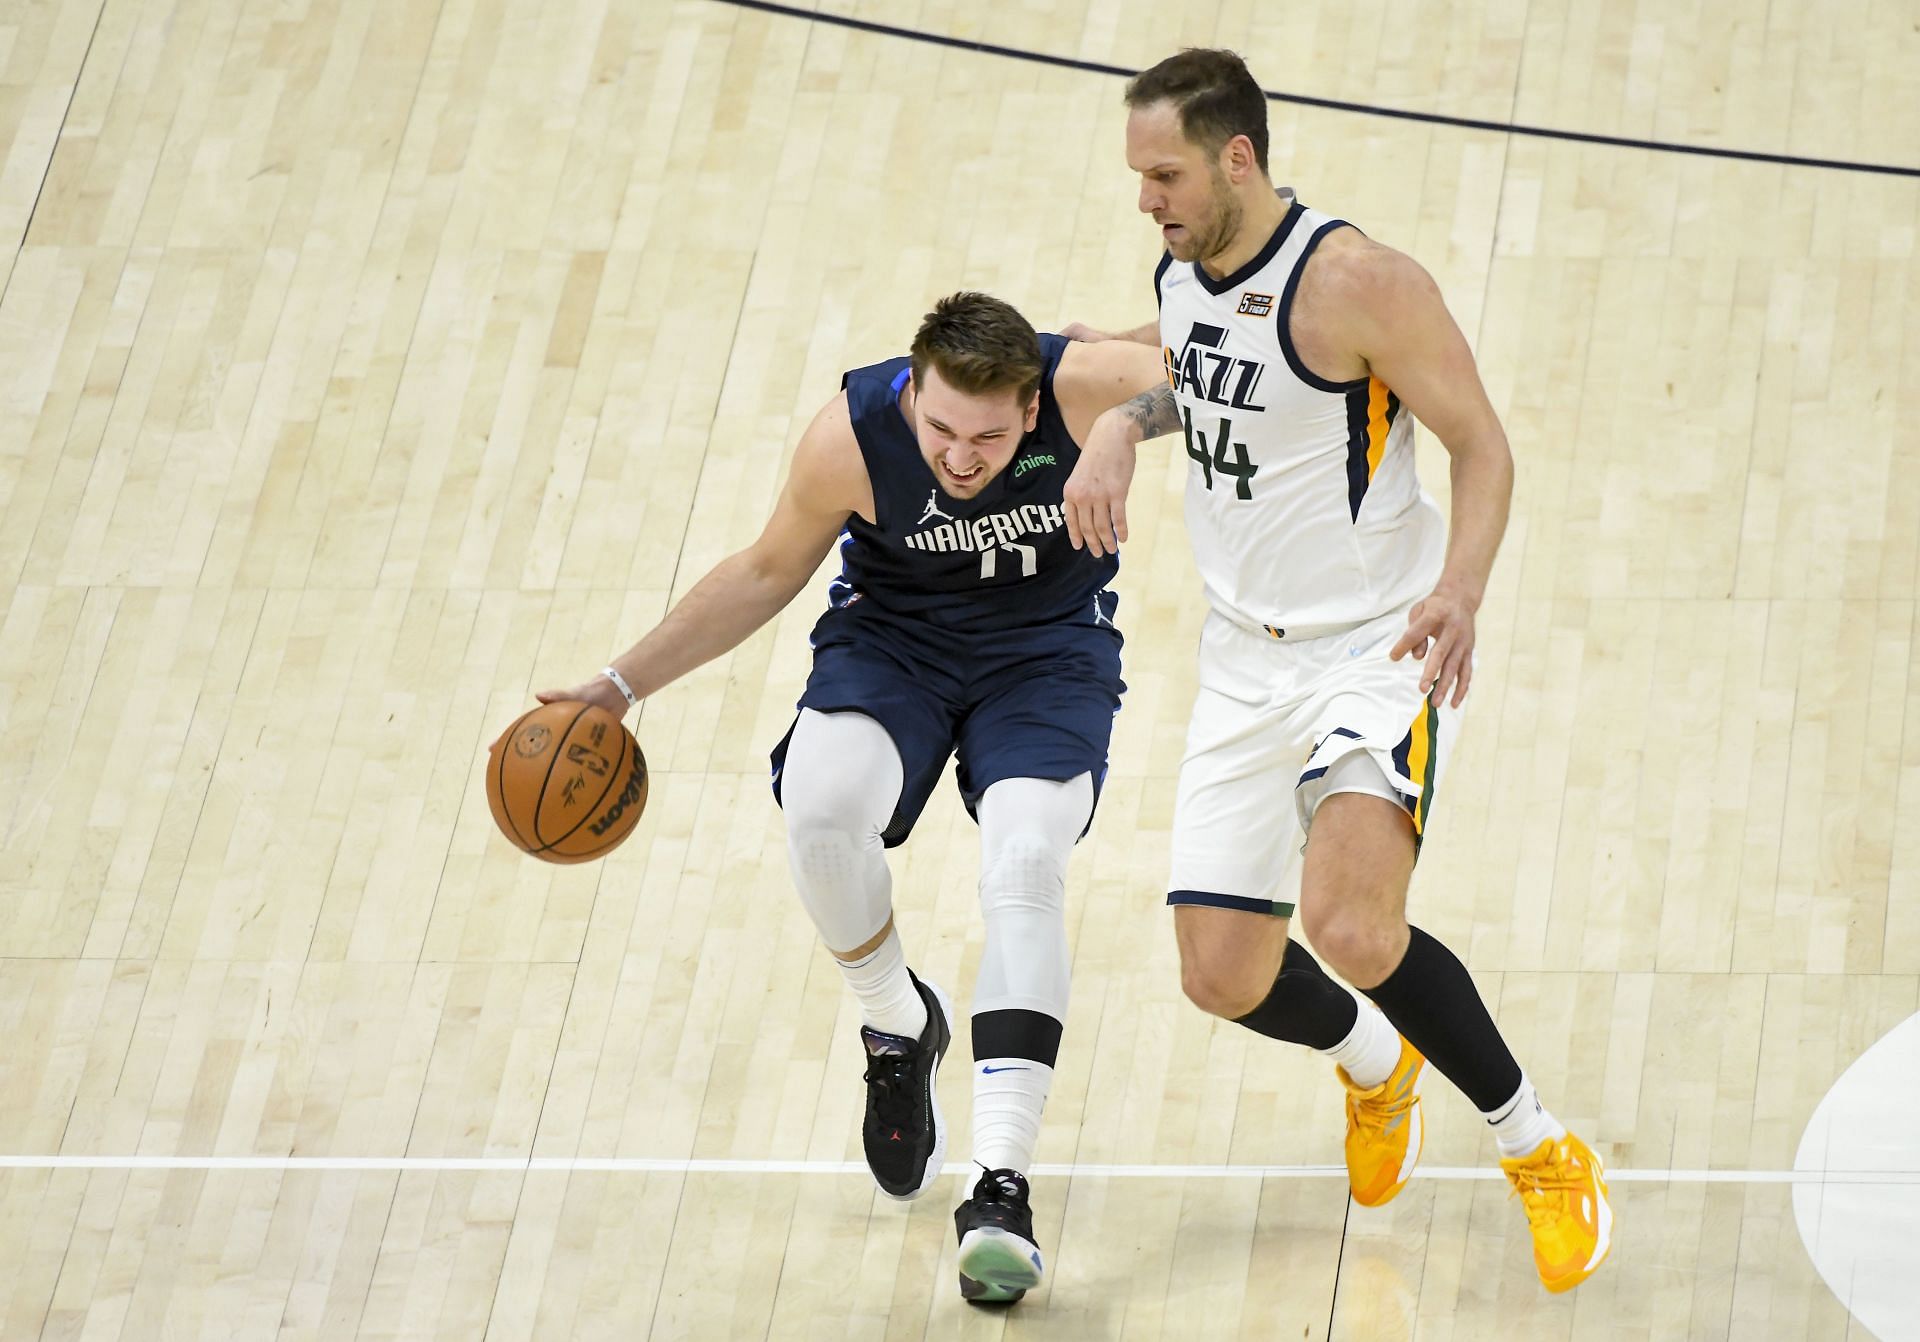 The Dallas Mavericks will host the Utah Jazz for Game 5 on April 25th.